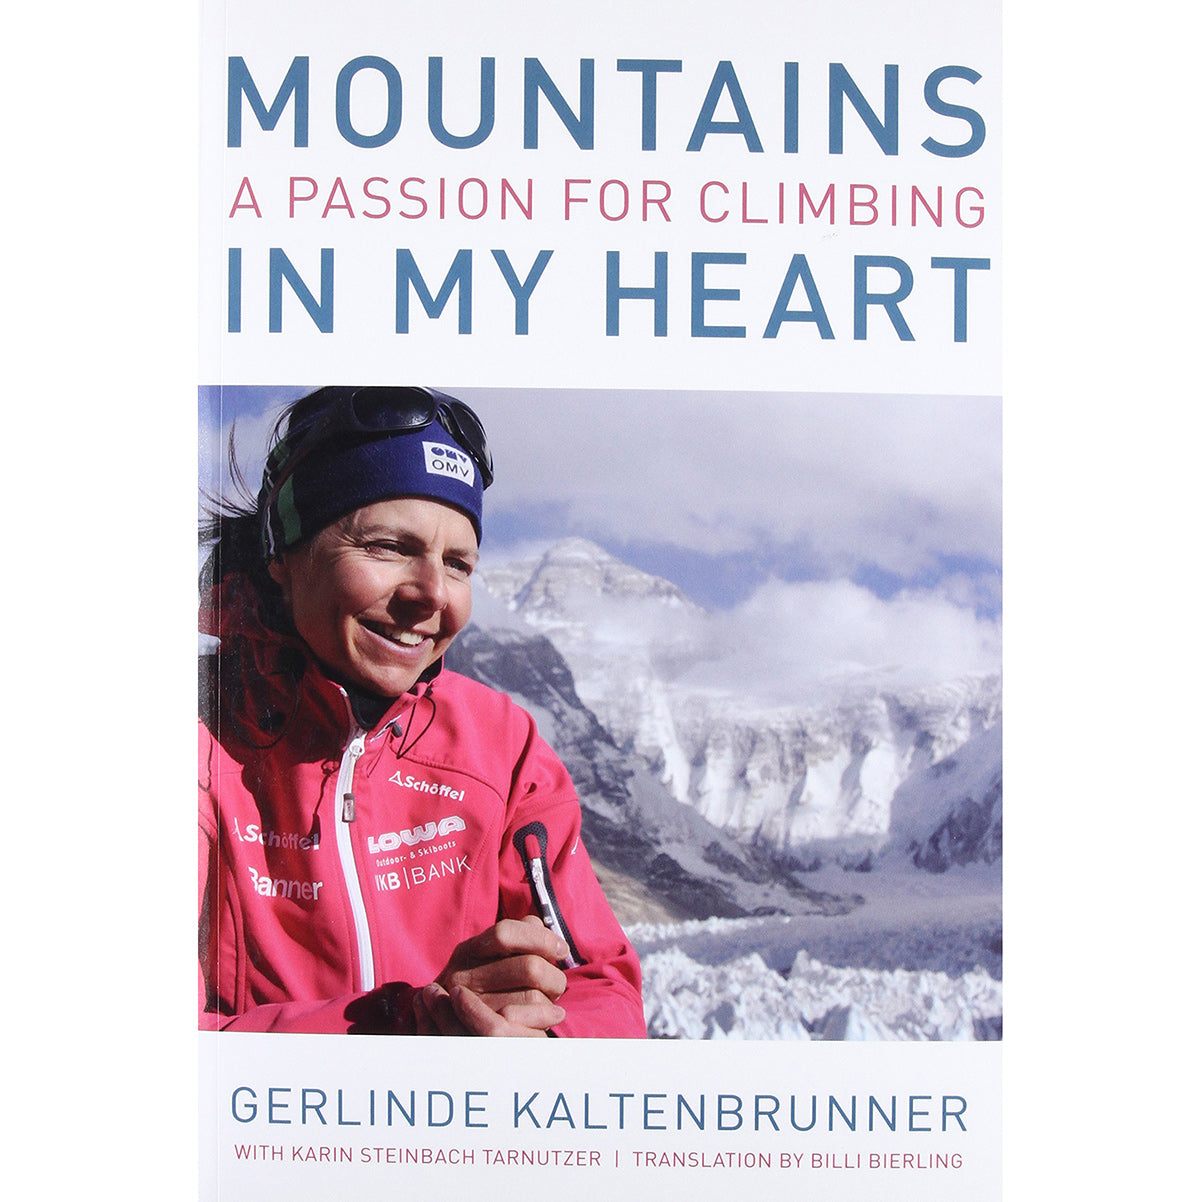 mountains in my heart: a passion for climbing